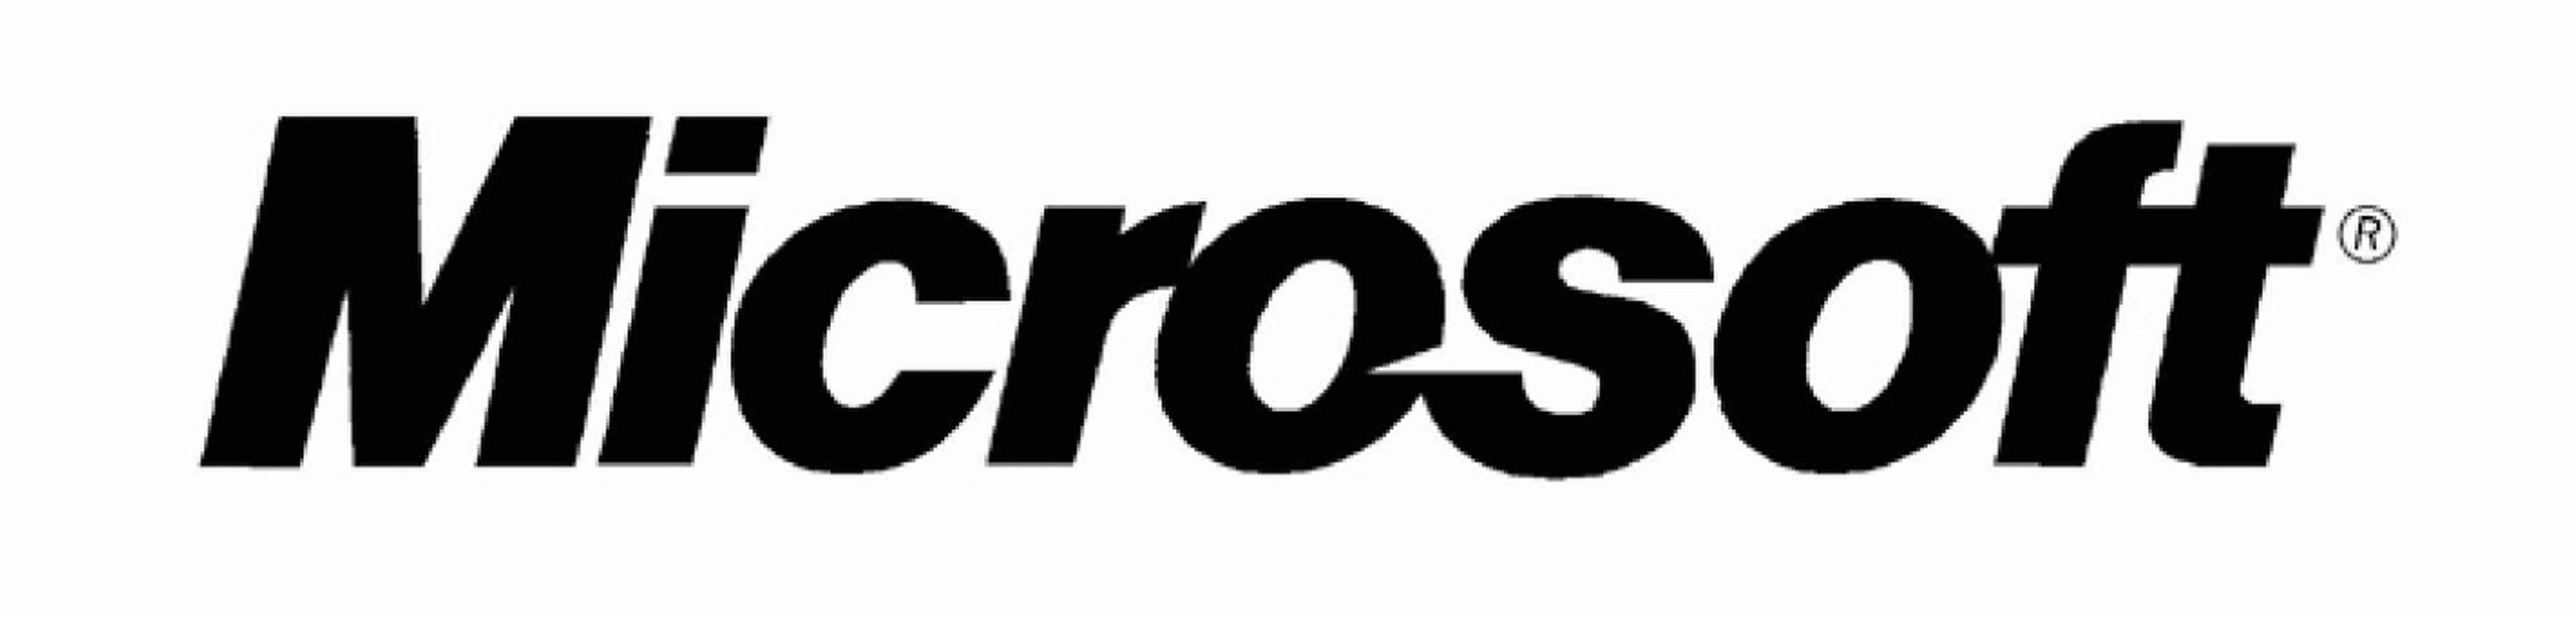 Microsoft Computer Logo - Why would Microsoft release early MS-DOS and Word code? | ZDNet